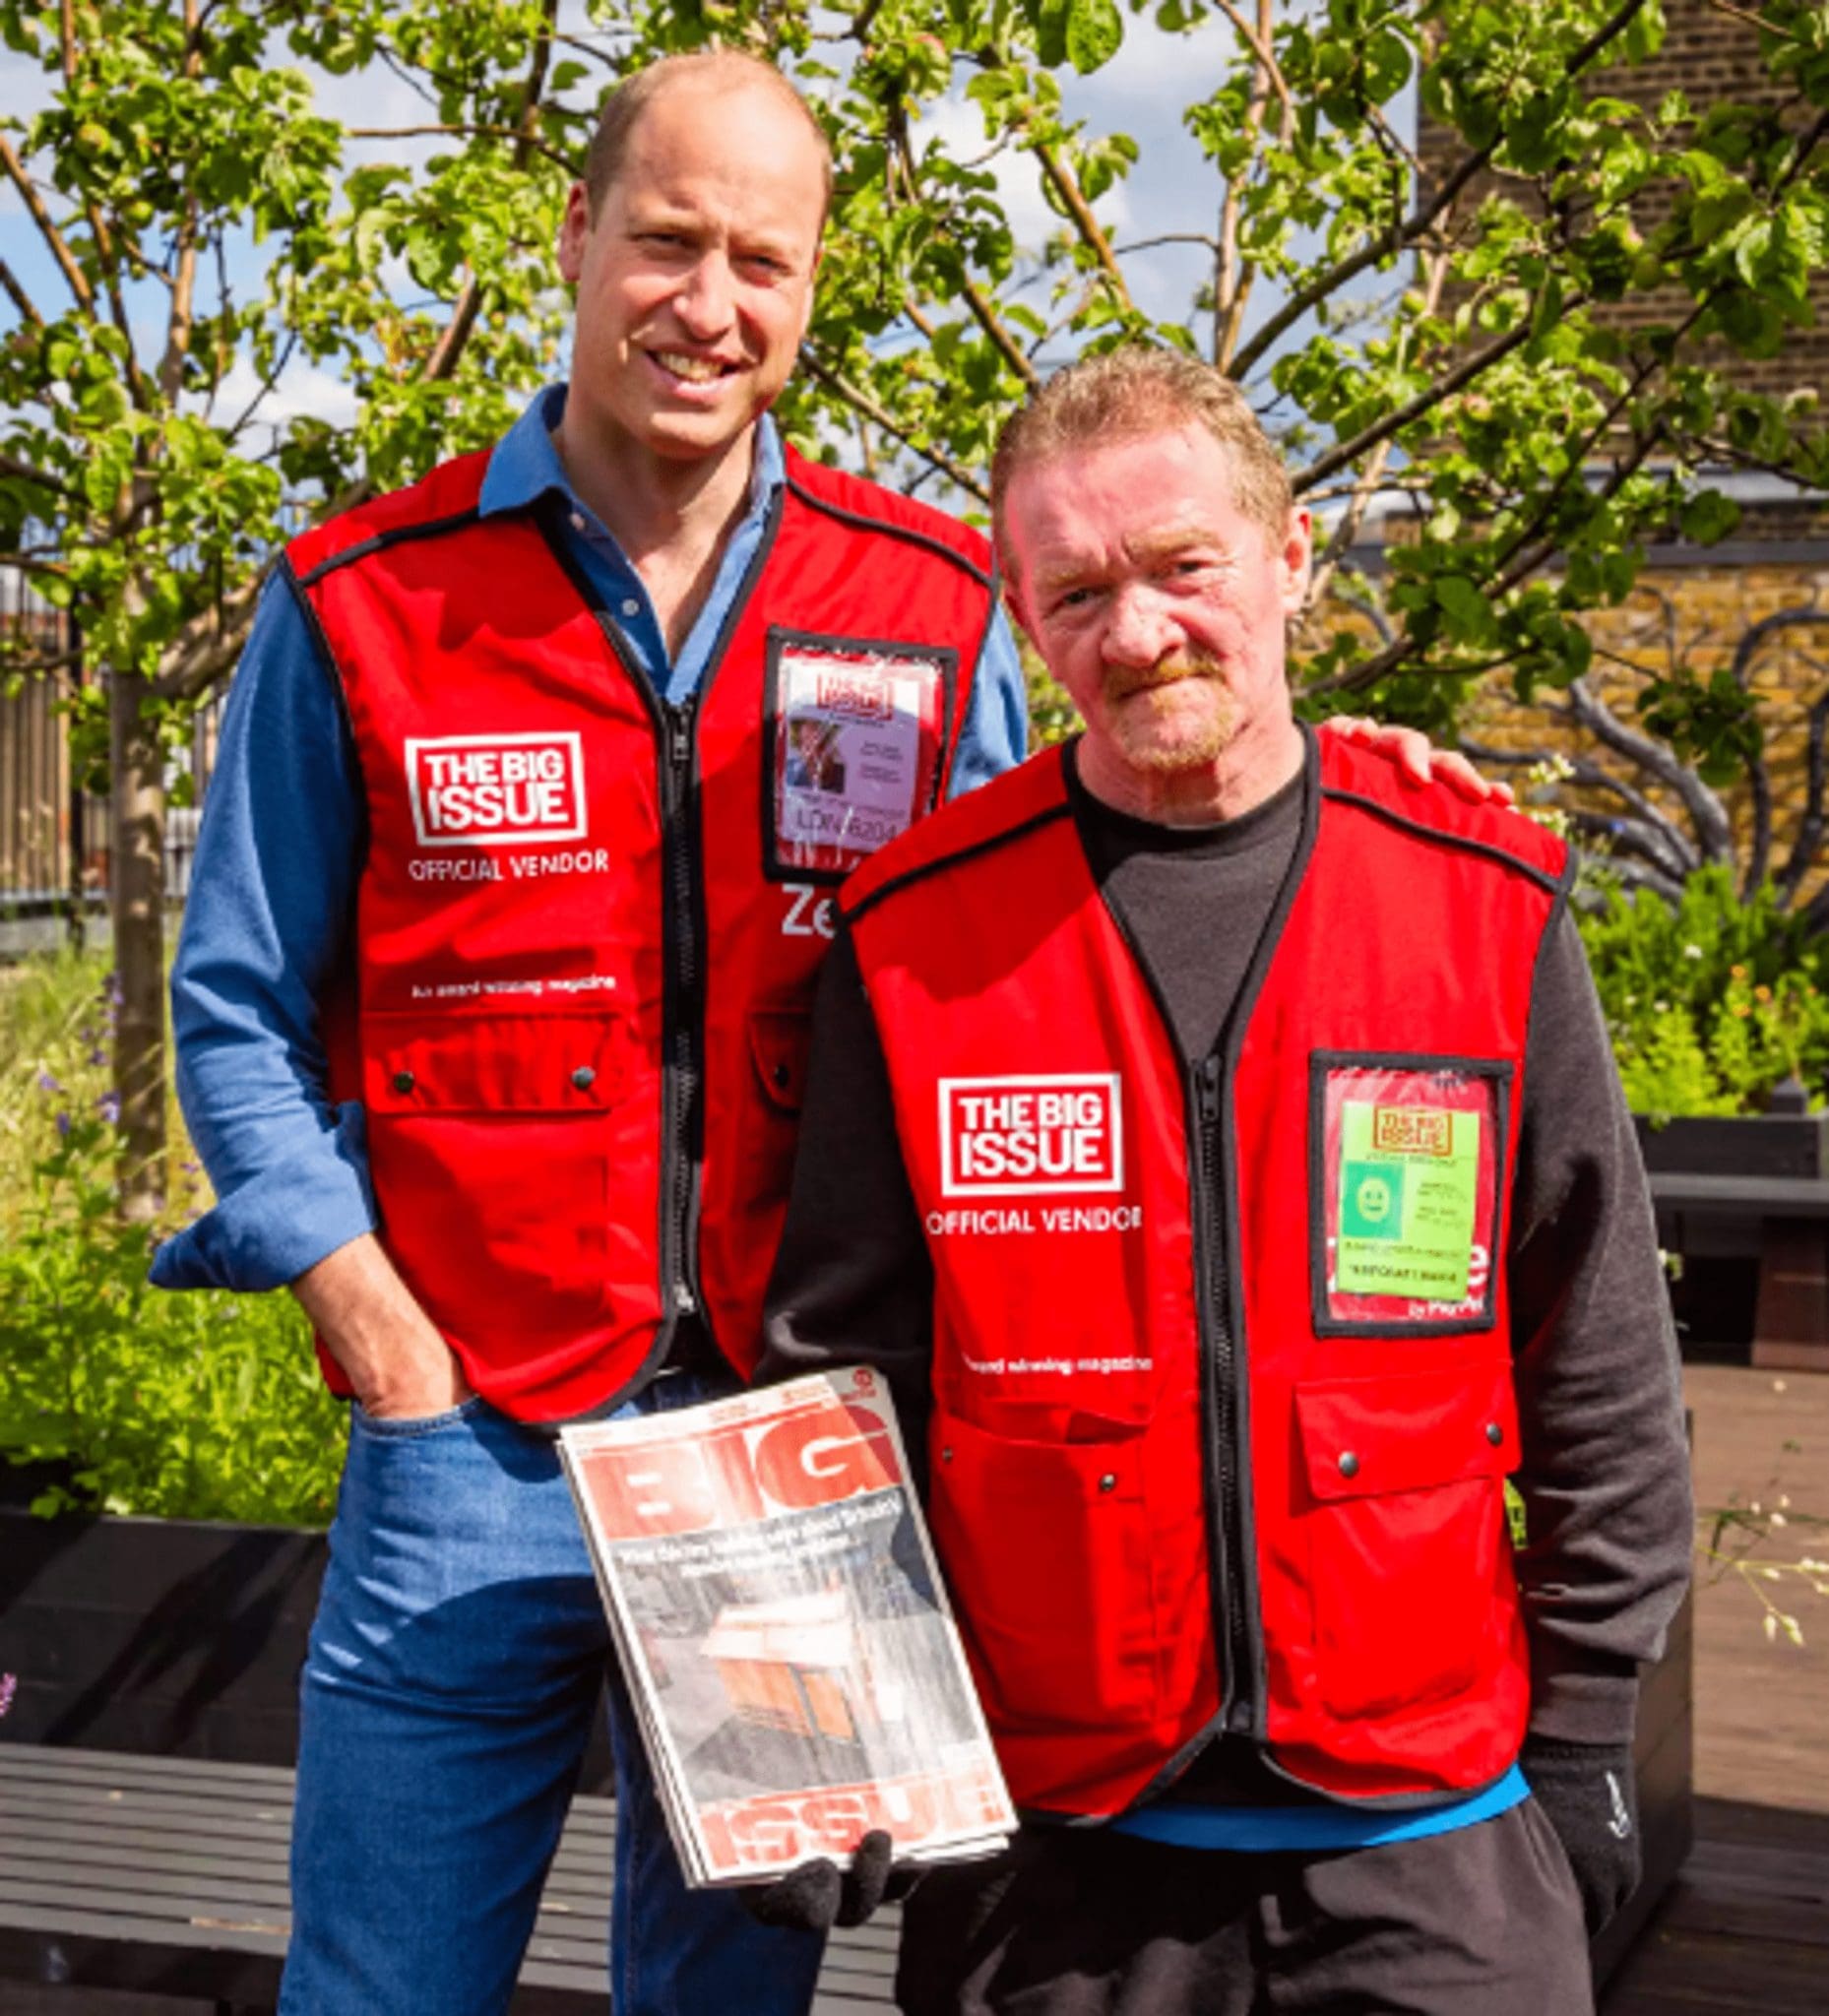 Prince William became the subject of a special issue of the social magazine The Big Issue